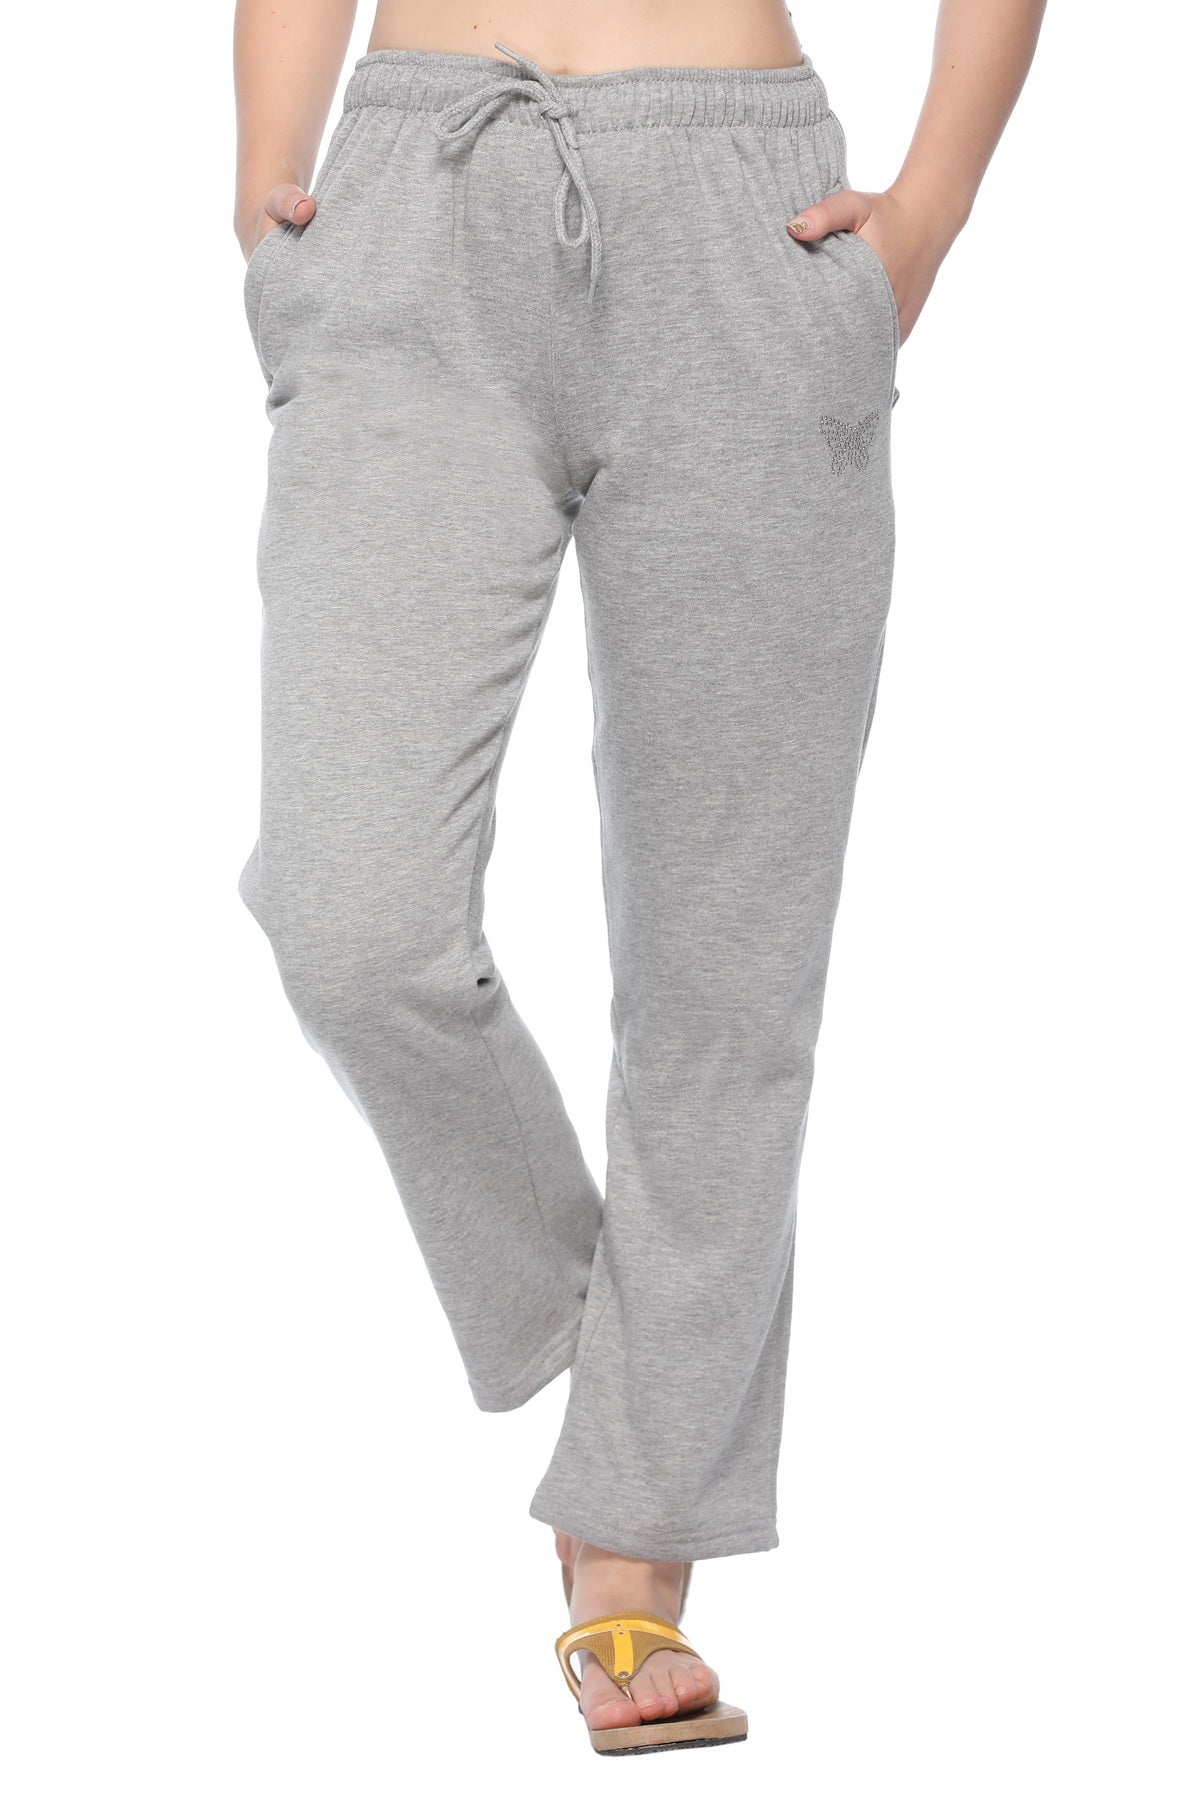 Buy Stylish Track pants for Women (Pack Of 3) online in India